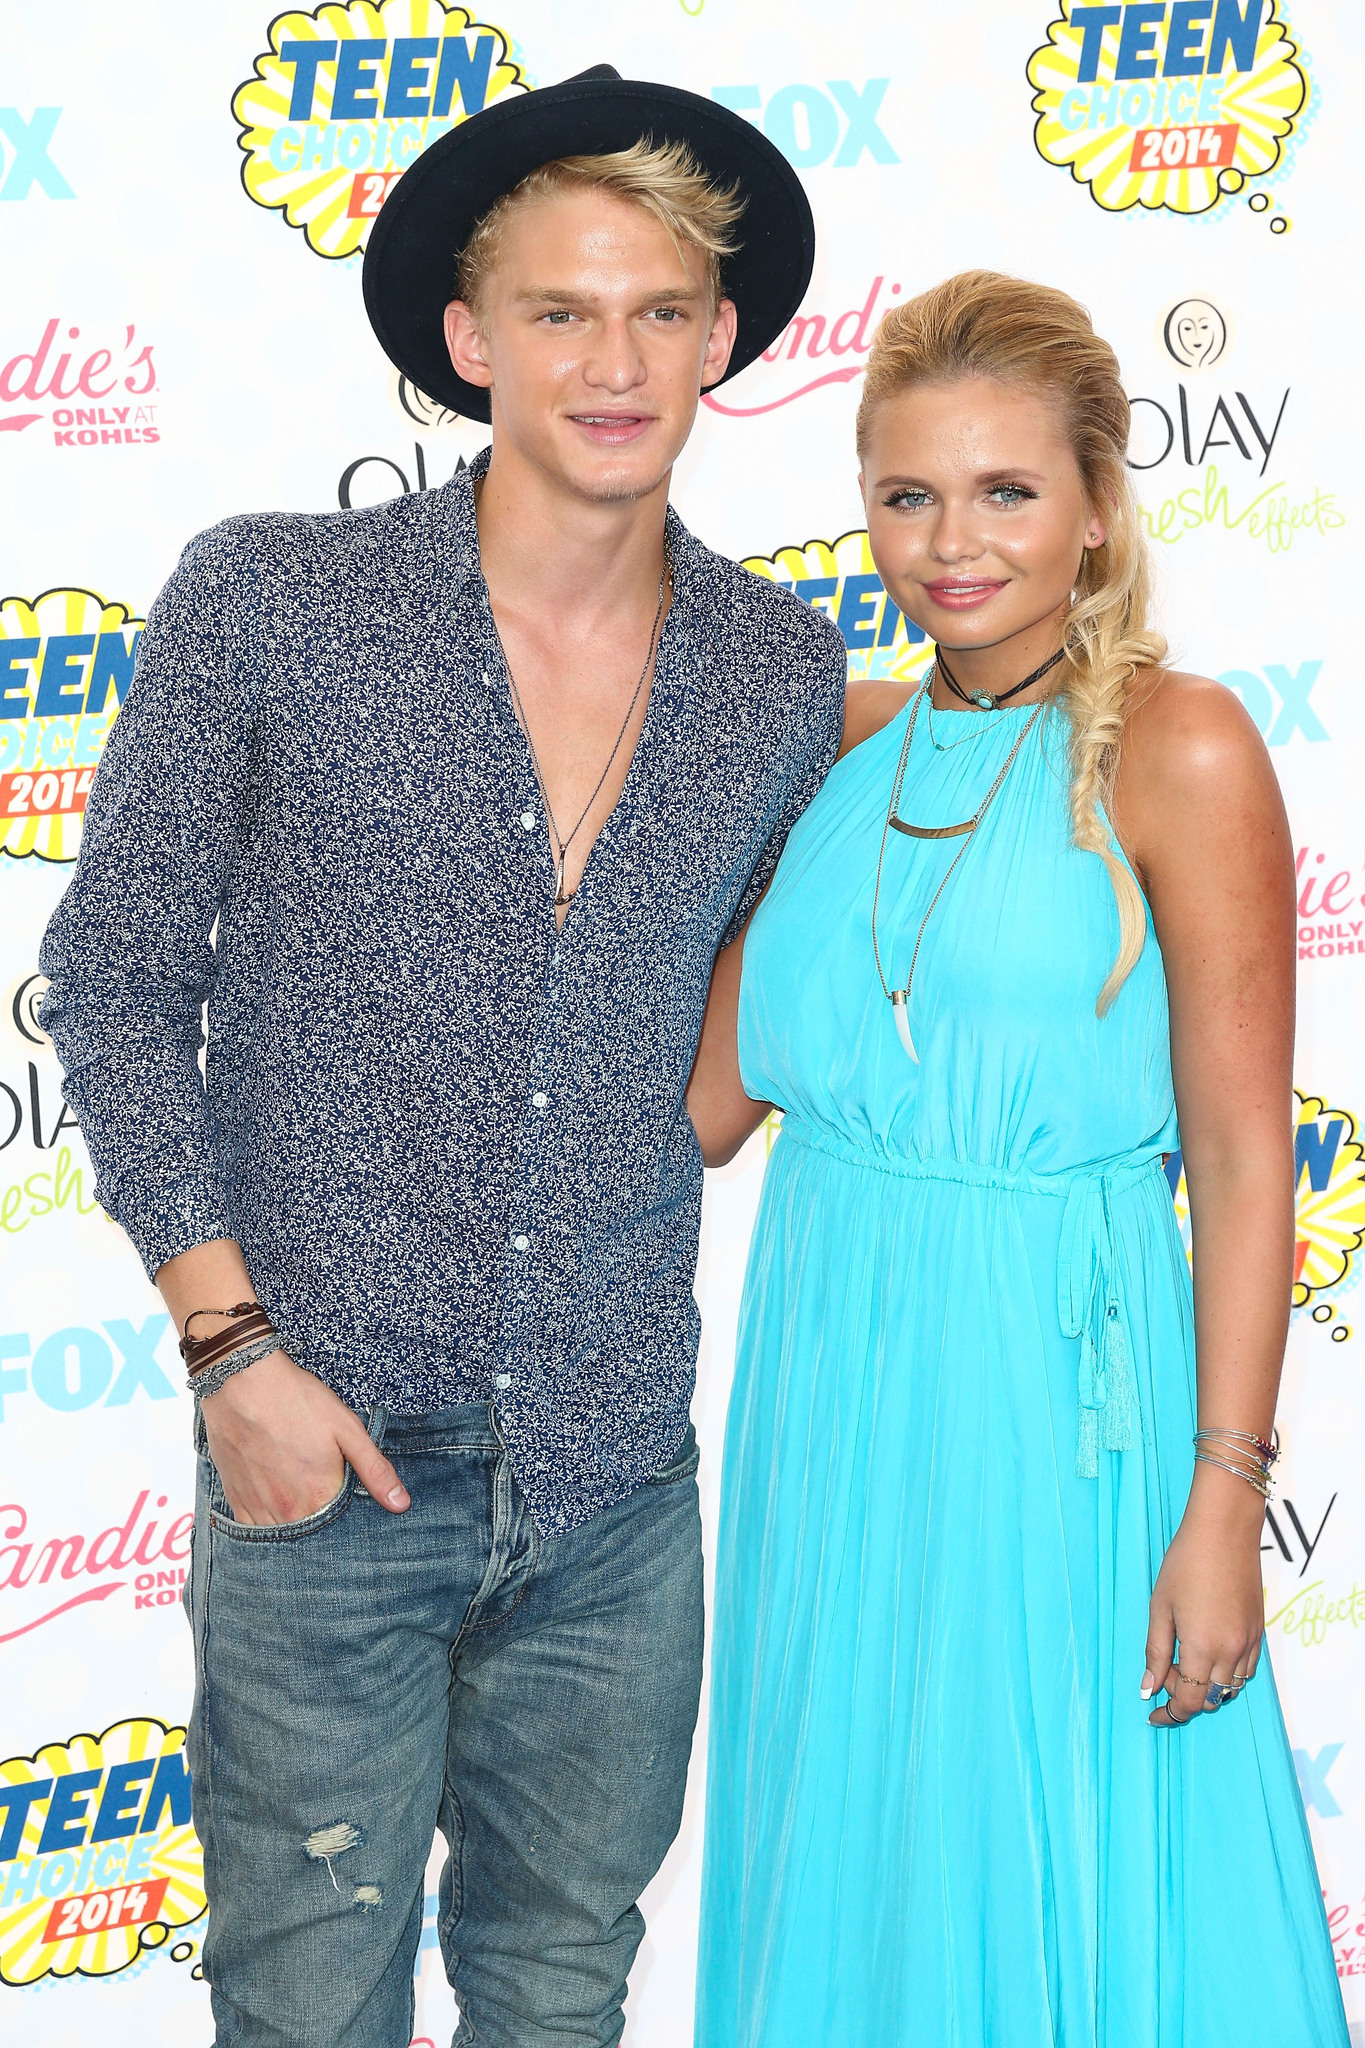 Cody Simpson and Alli Simpson at event of Teen Choice Awards 2014 (2014)